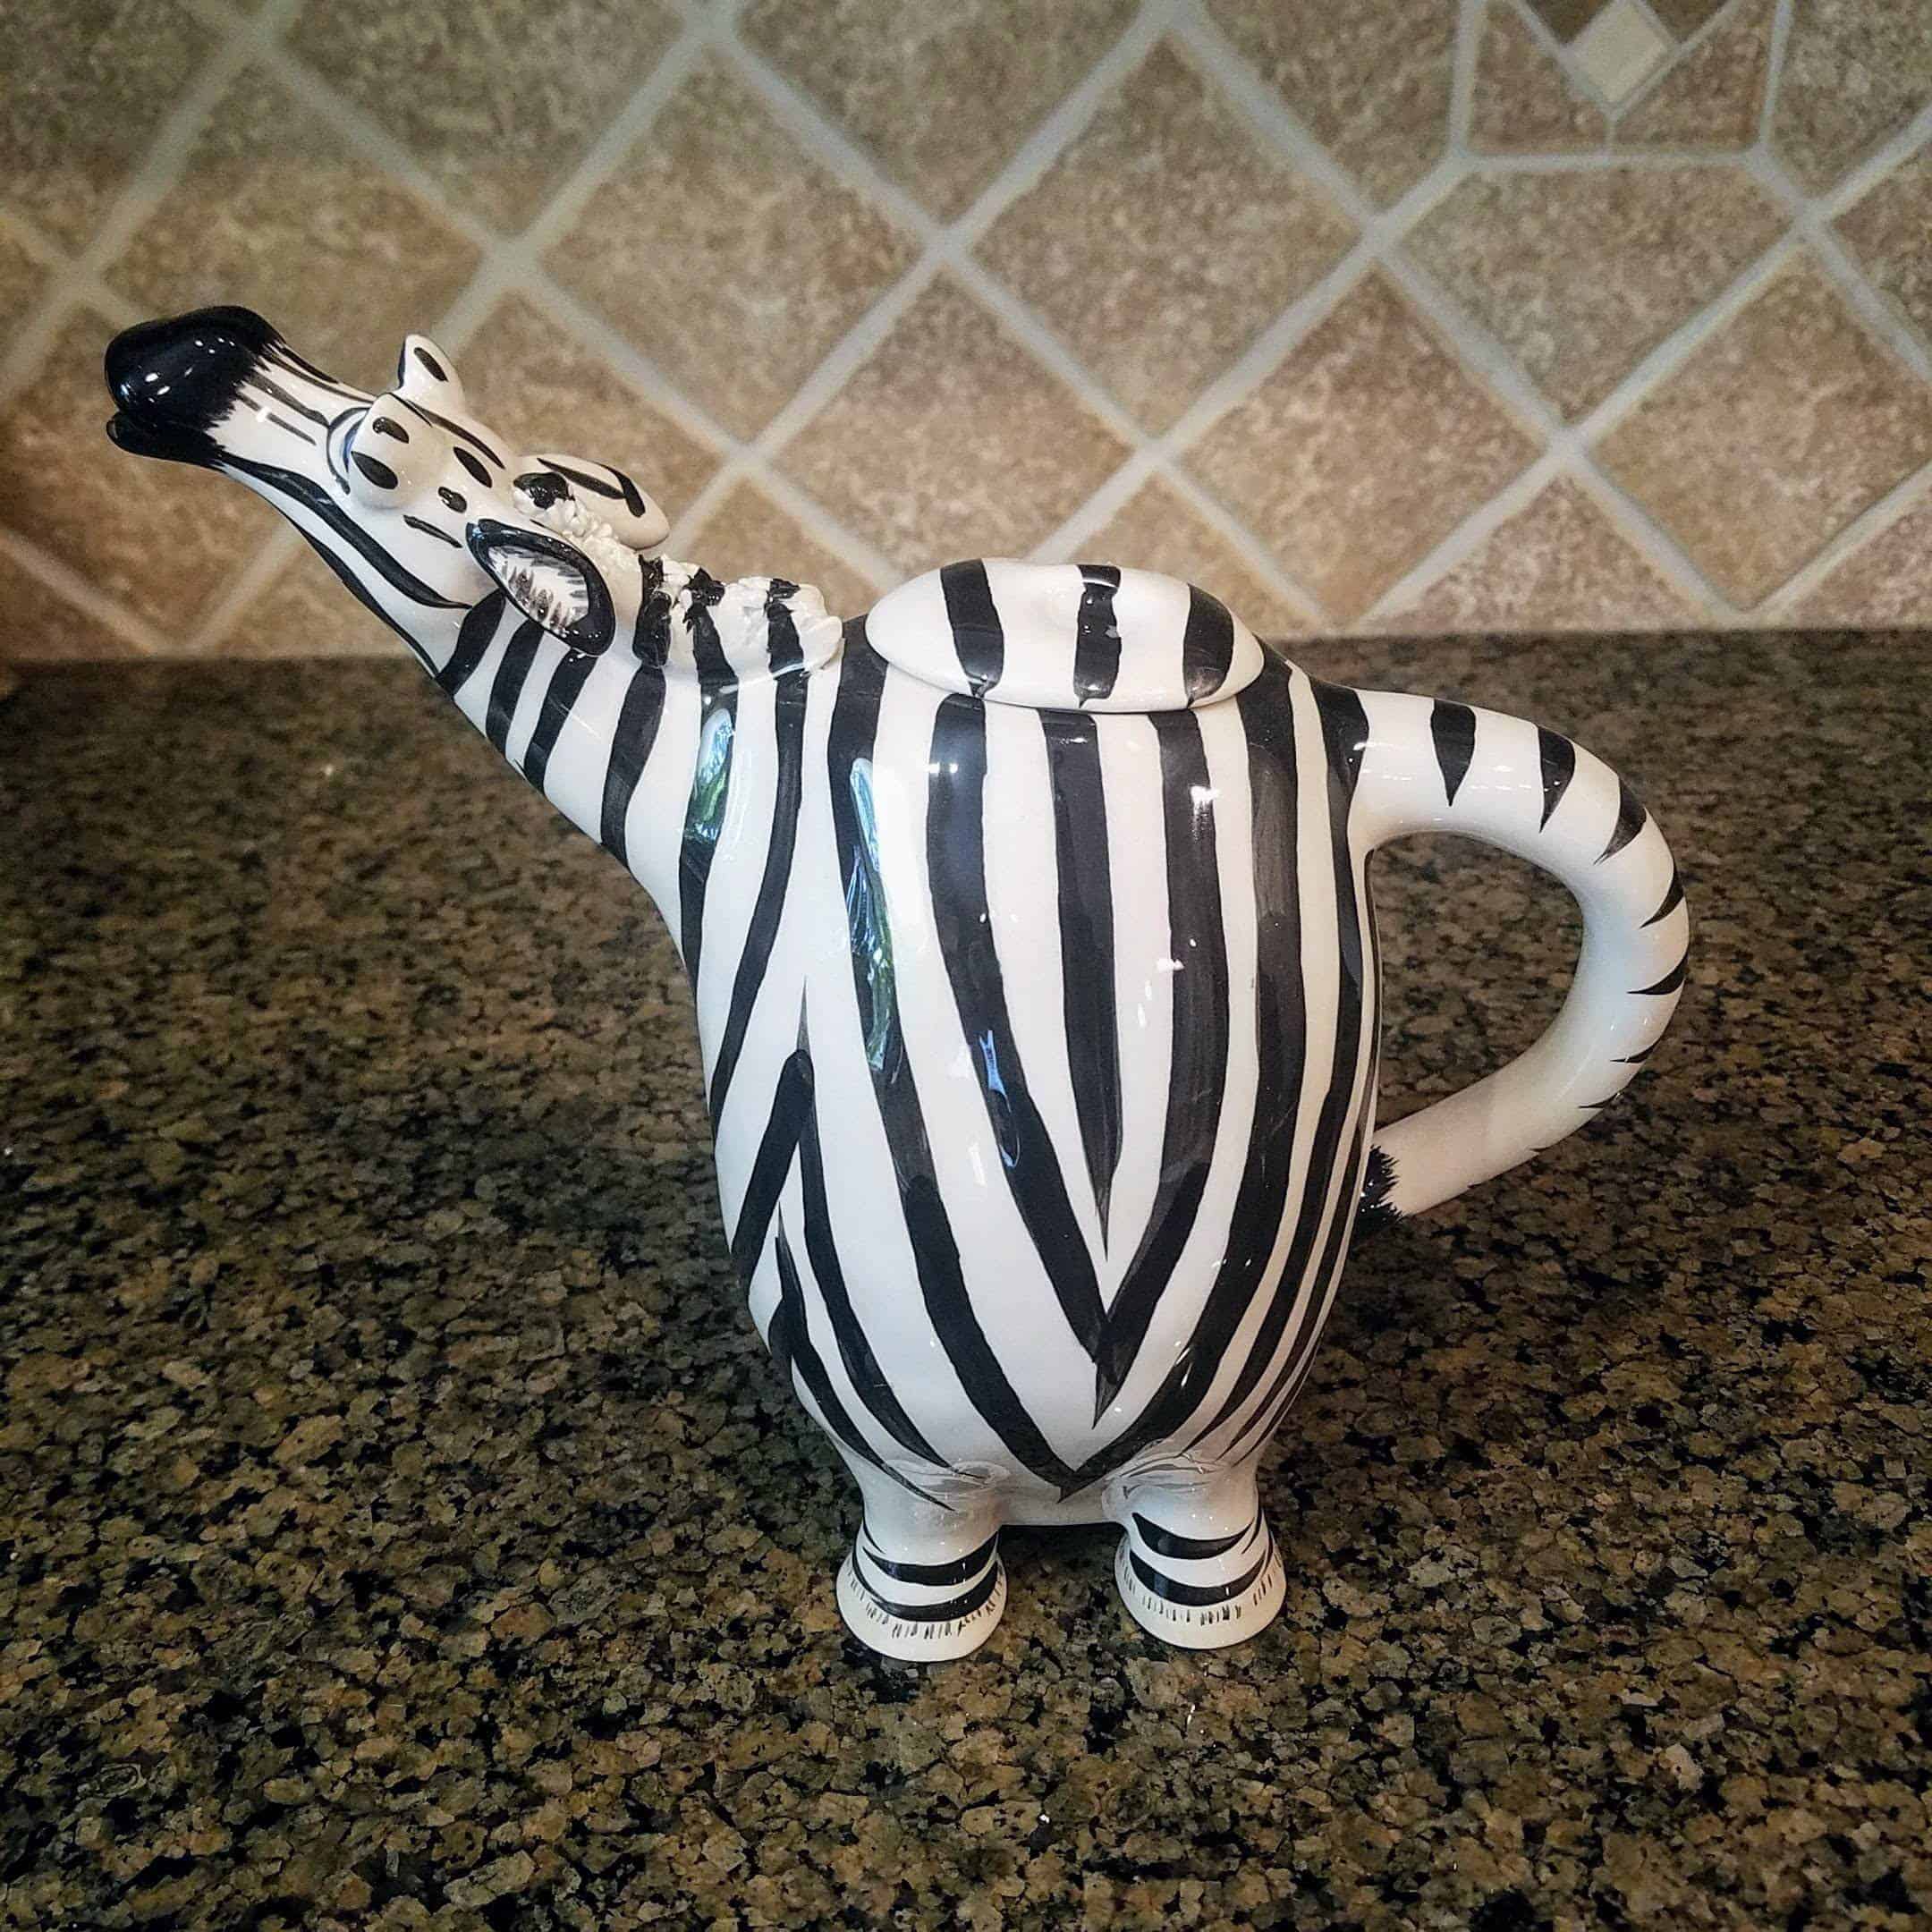 This Zebra Ceramic Teapot is made with love by Premier Homegoods! Shop more unique gift ideas today with Spots Initiatives, the best way to support creators.